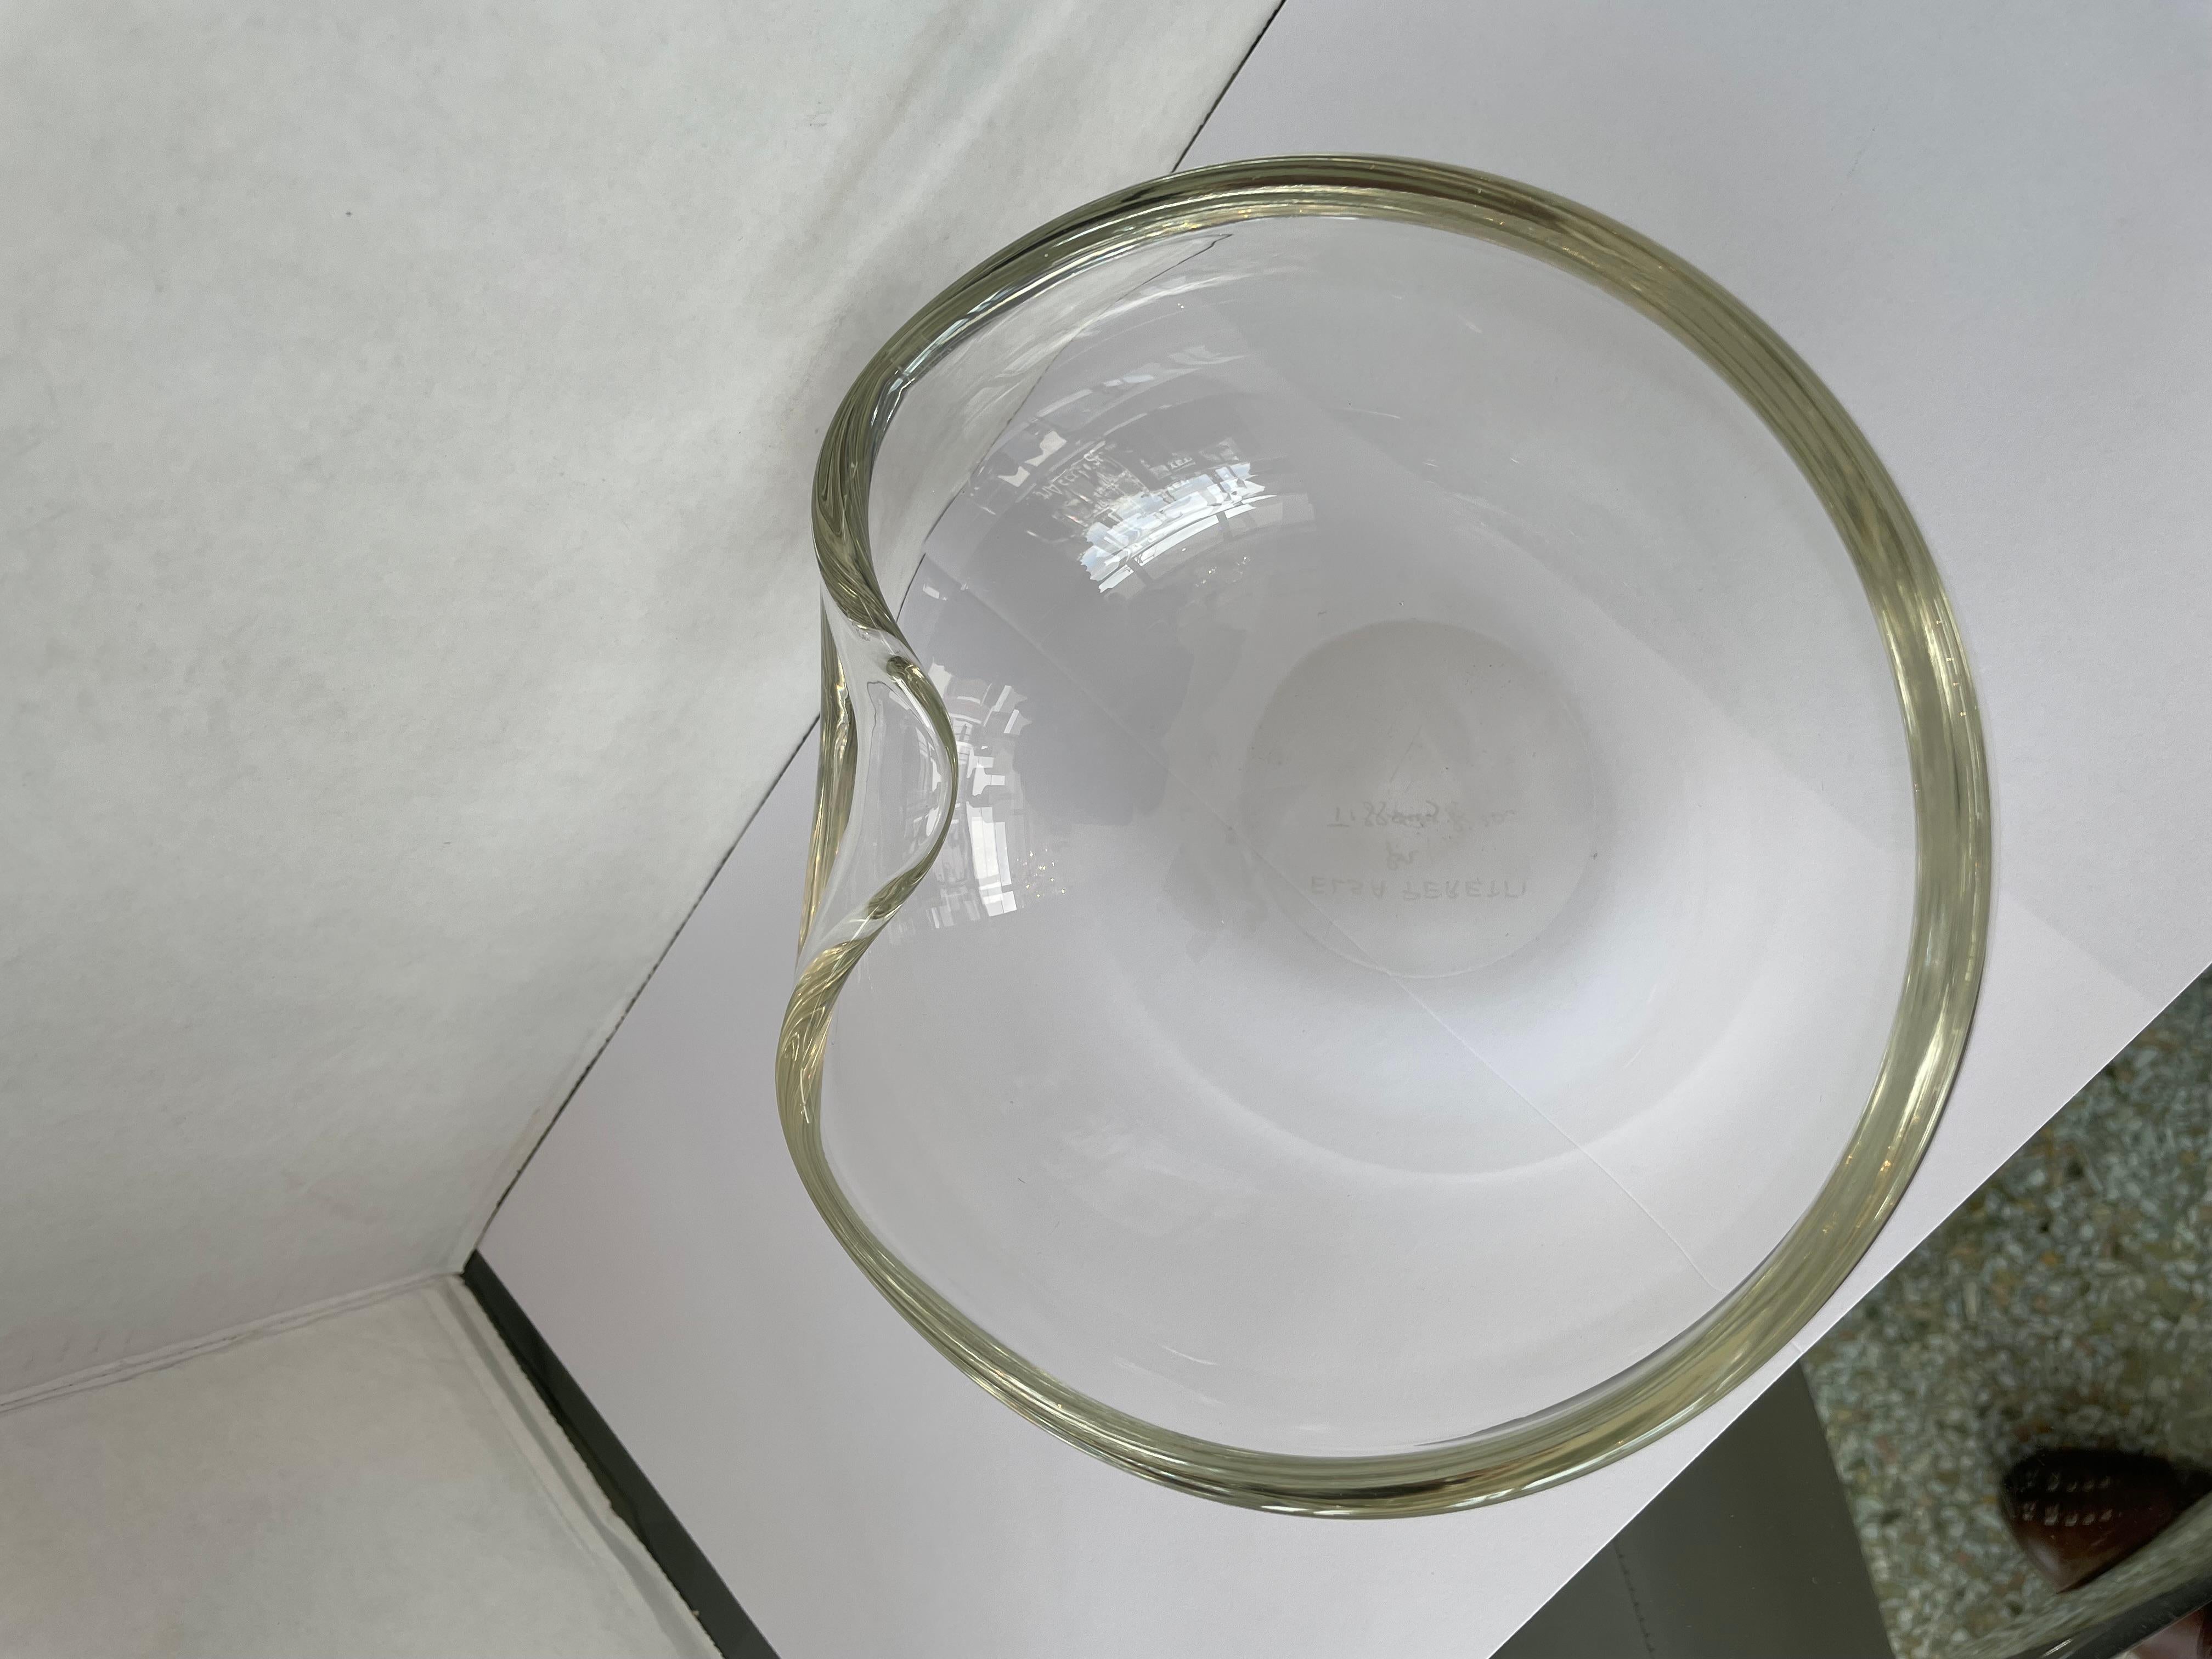 This stylish, chic and classic Tiffany bowl is know as the 